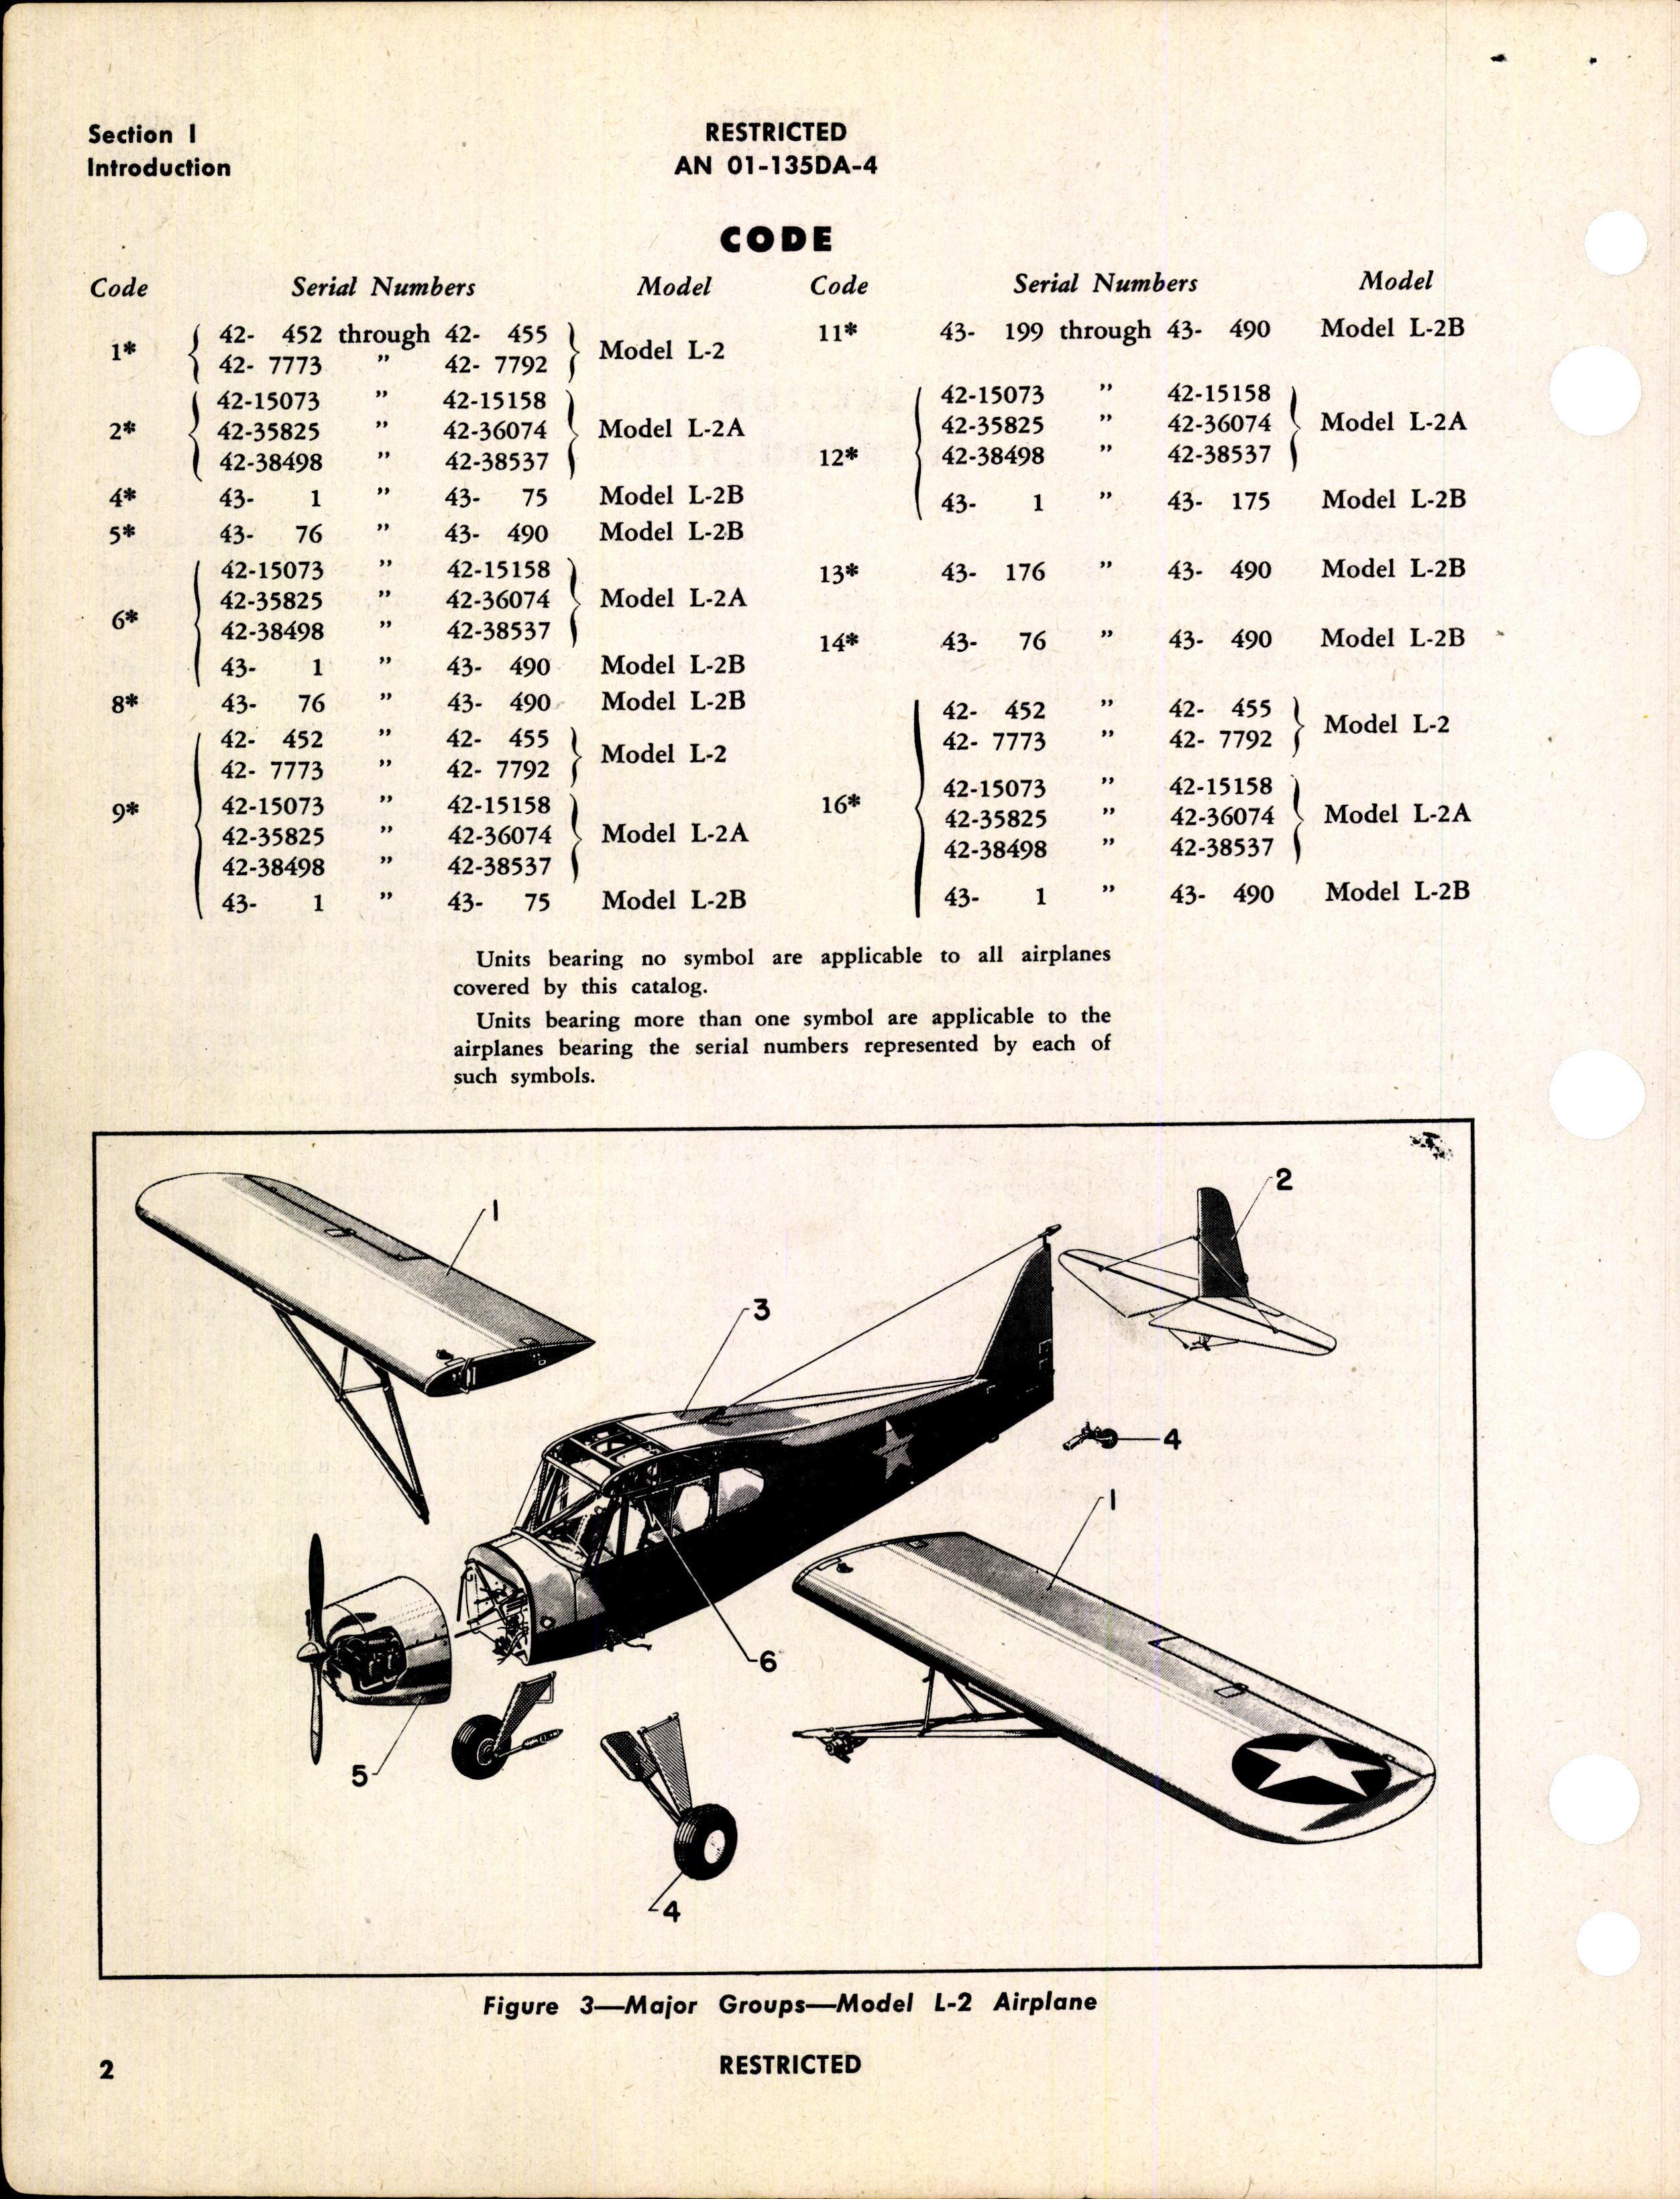 Sample page 6 from AirCorps Library document: Parts Catalog for L-2, L-2A, and L-2B Airplanes